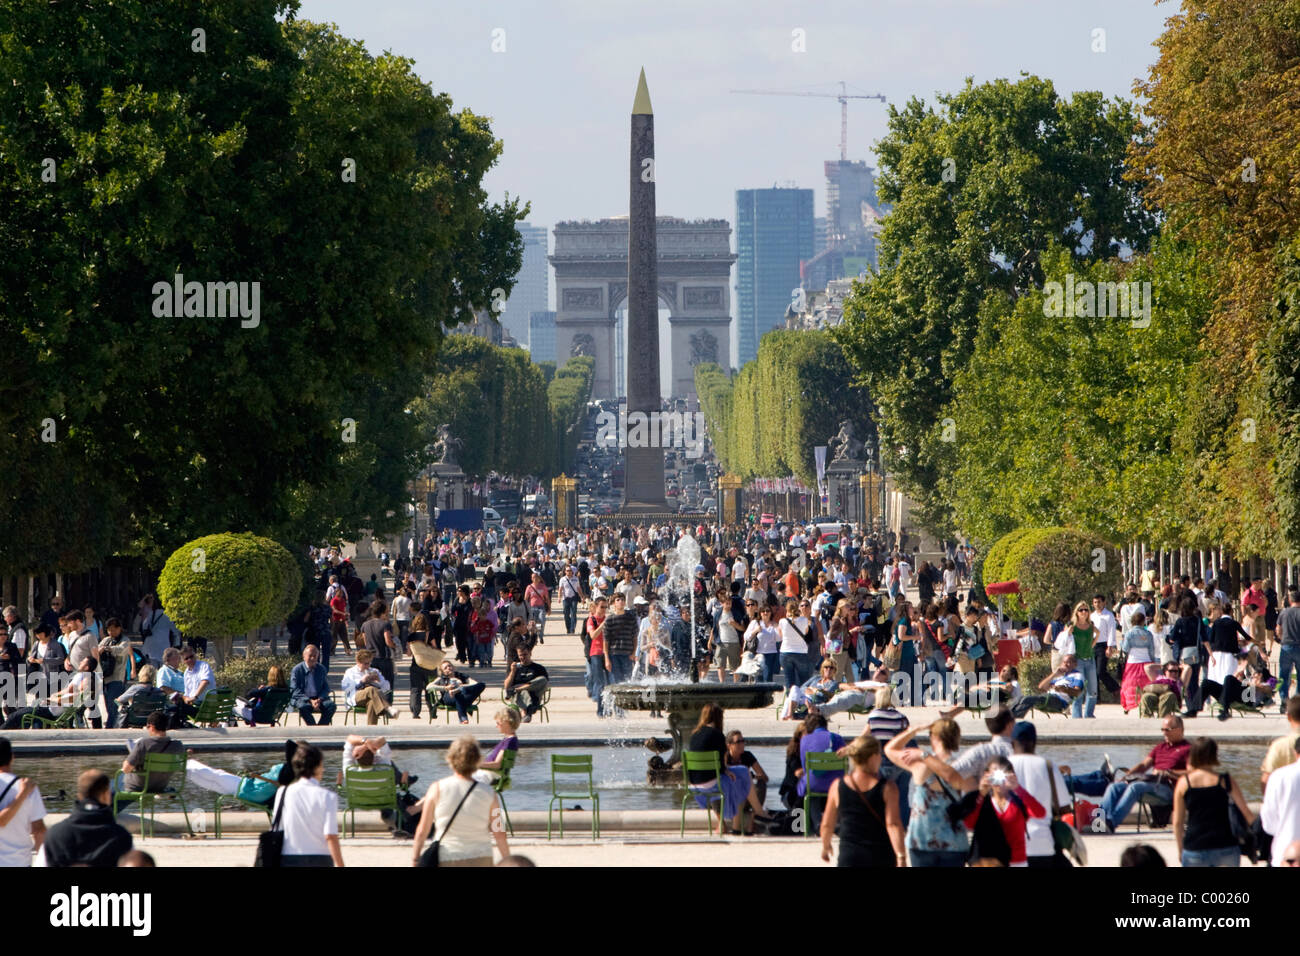 The Obelisk of Luxor and the Arch de Triomphe at the west end of the Avenue des Champs-Elysees in Paris, France. Stock Photo